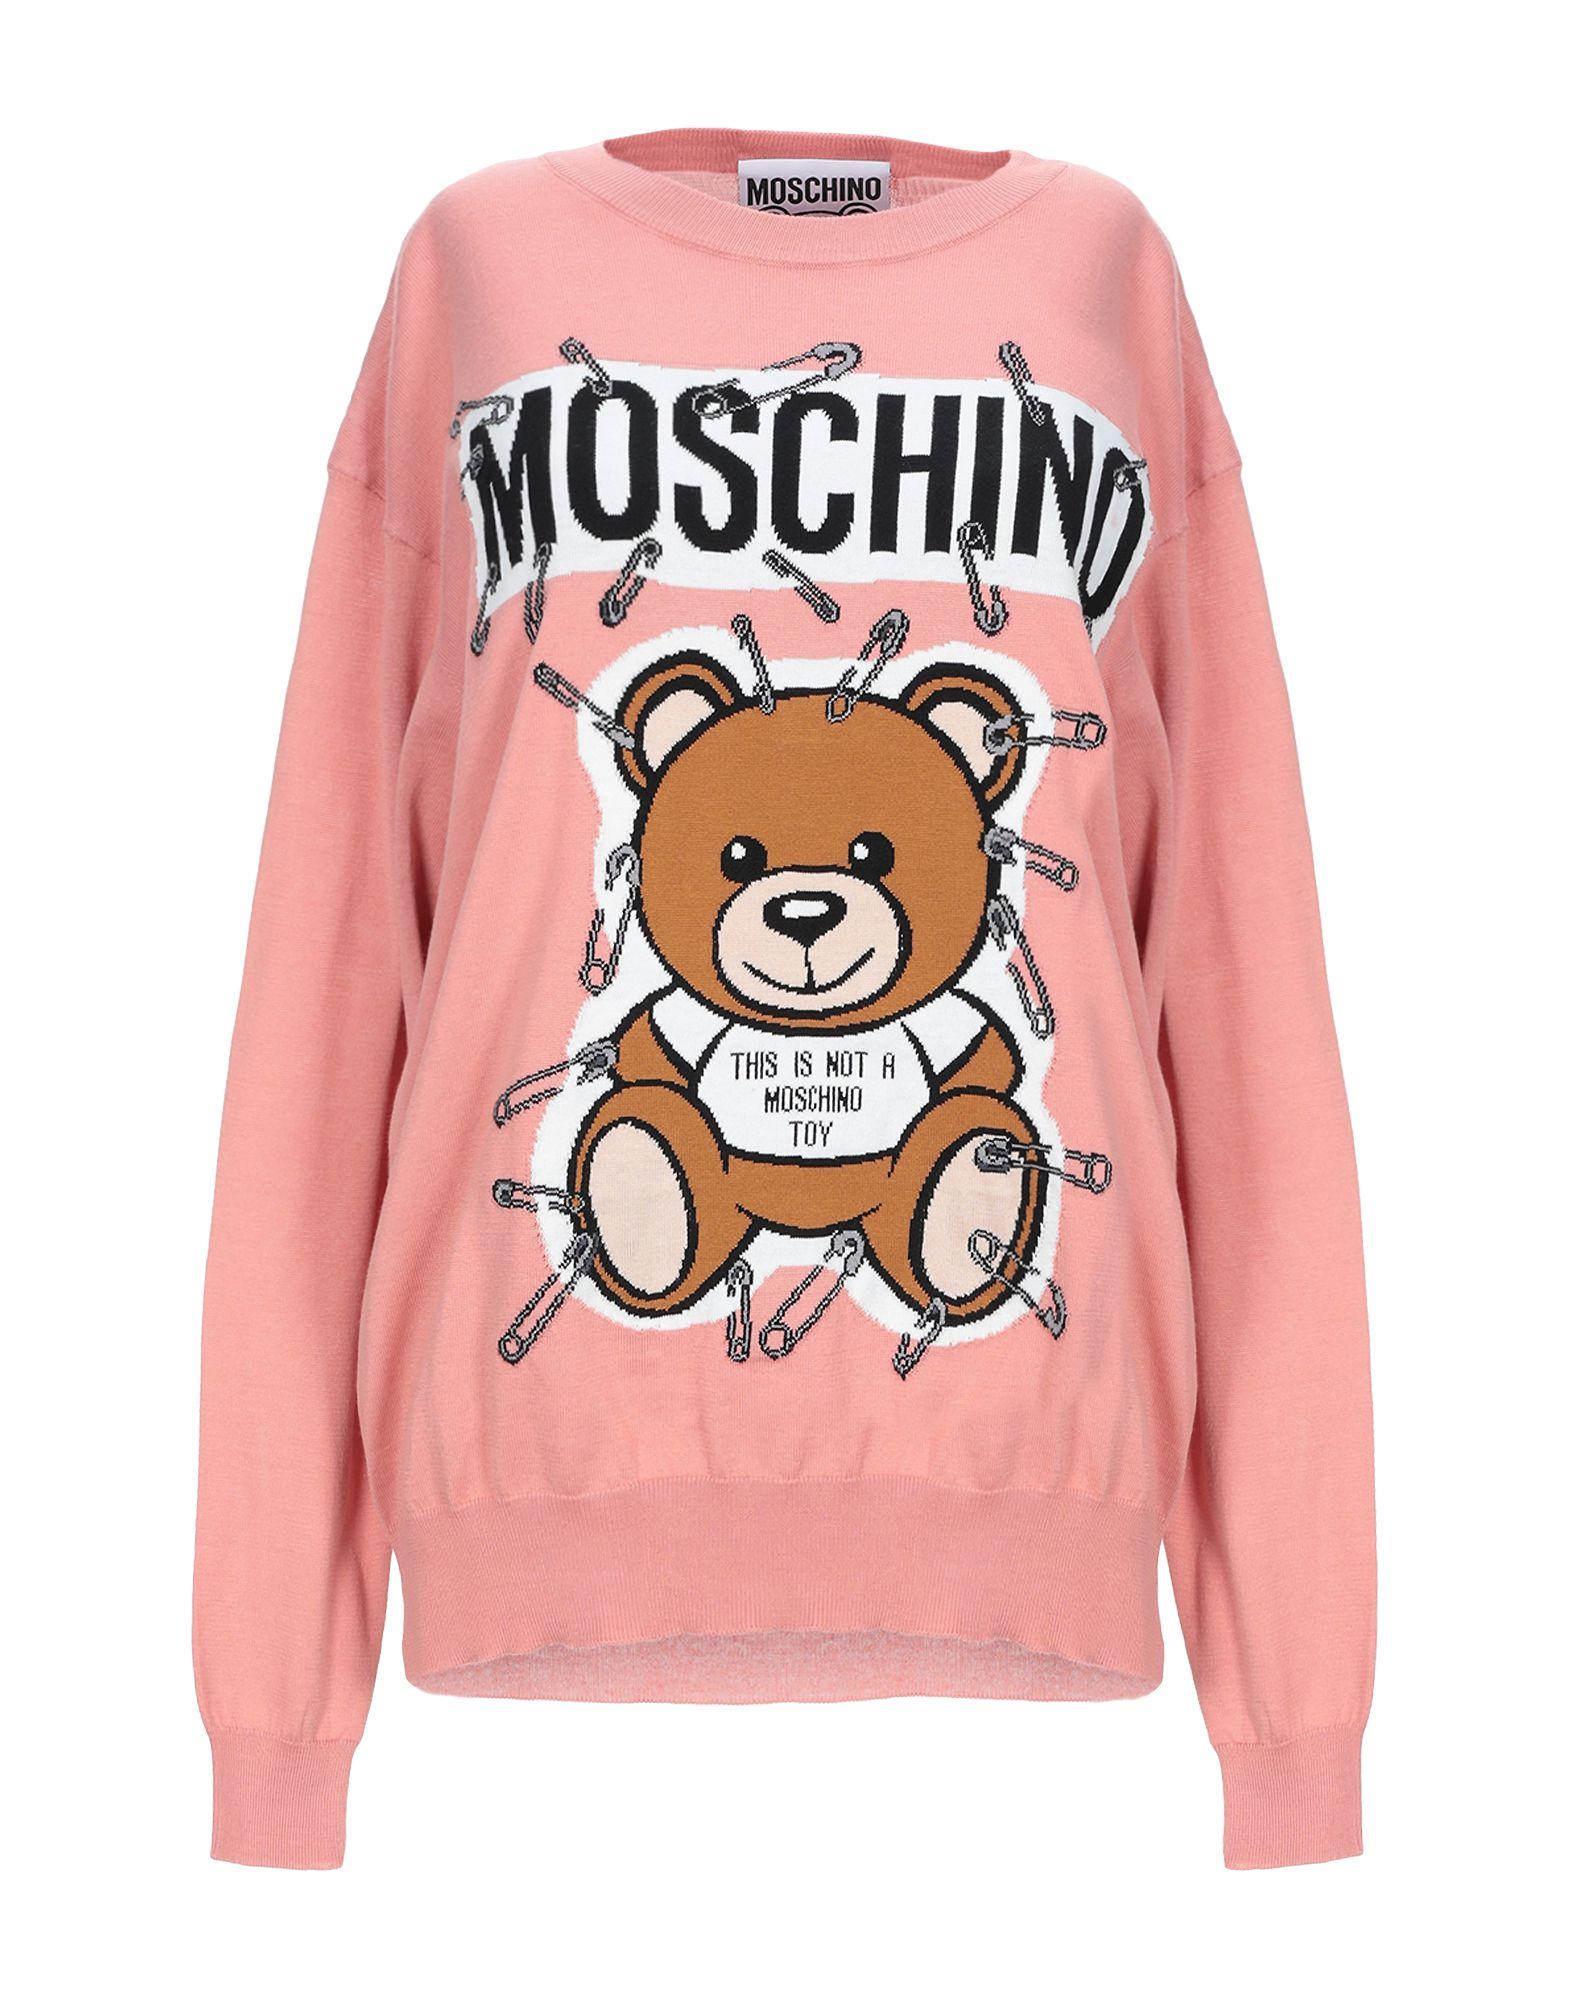 Moschino Cotton Sweater in Pastel Pink 